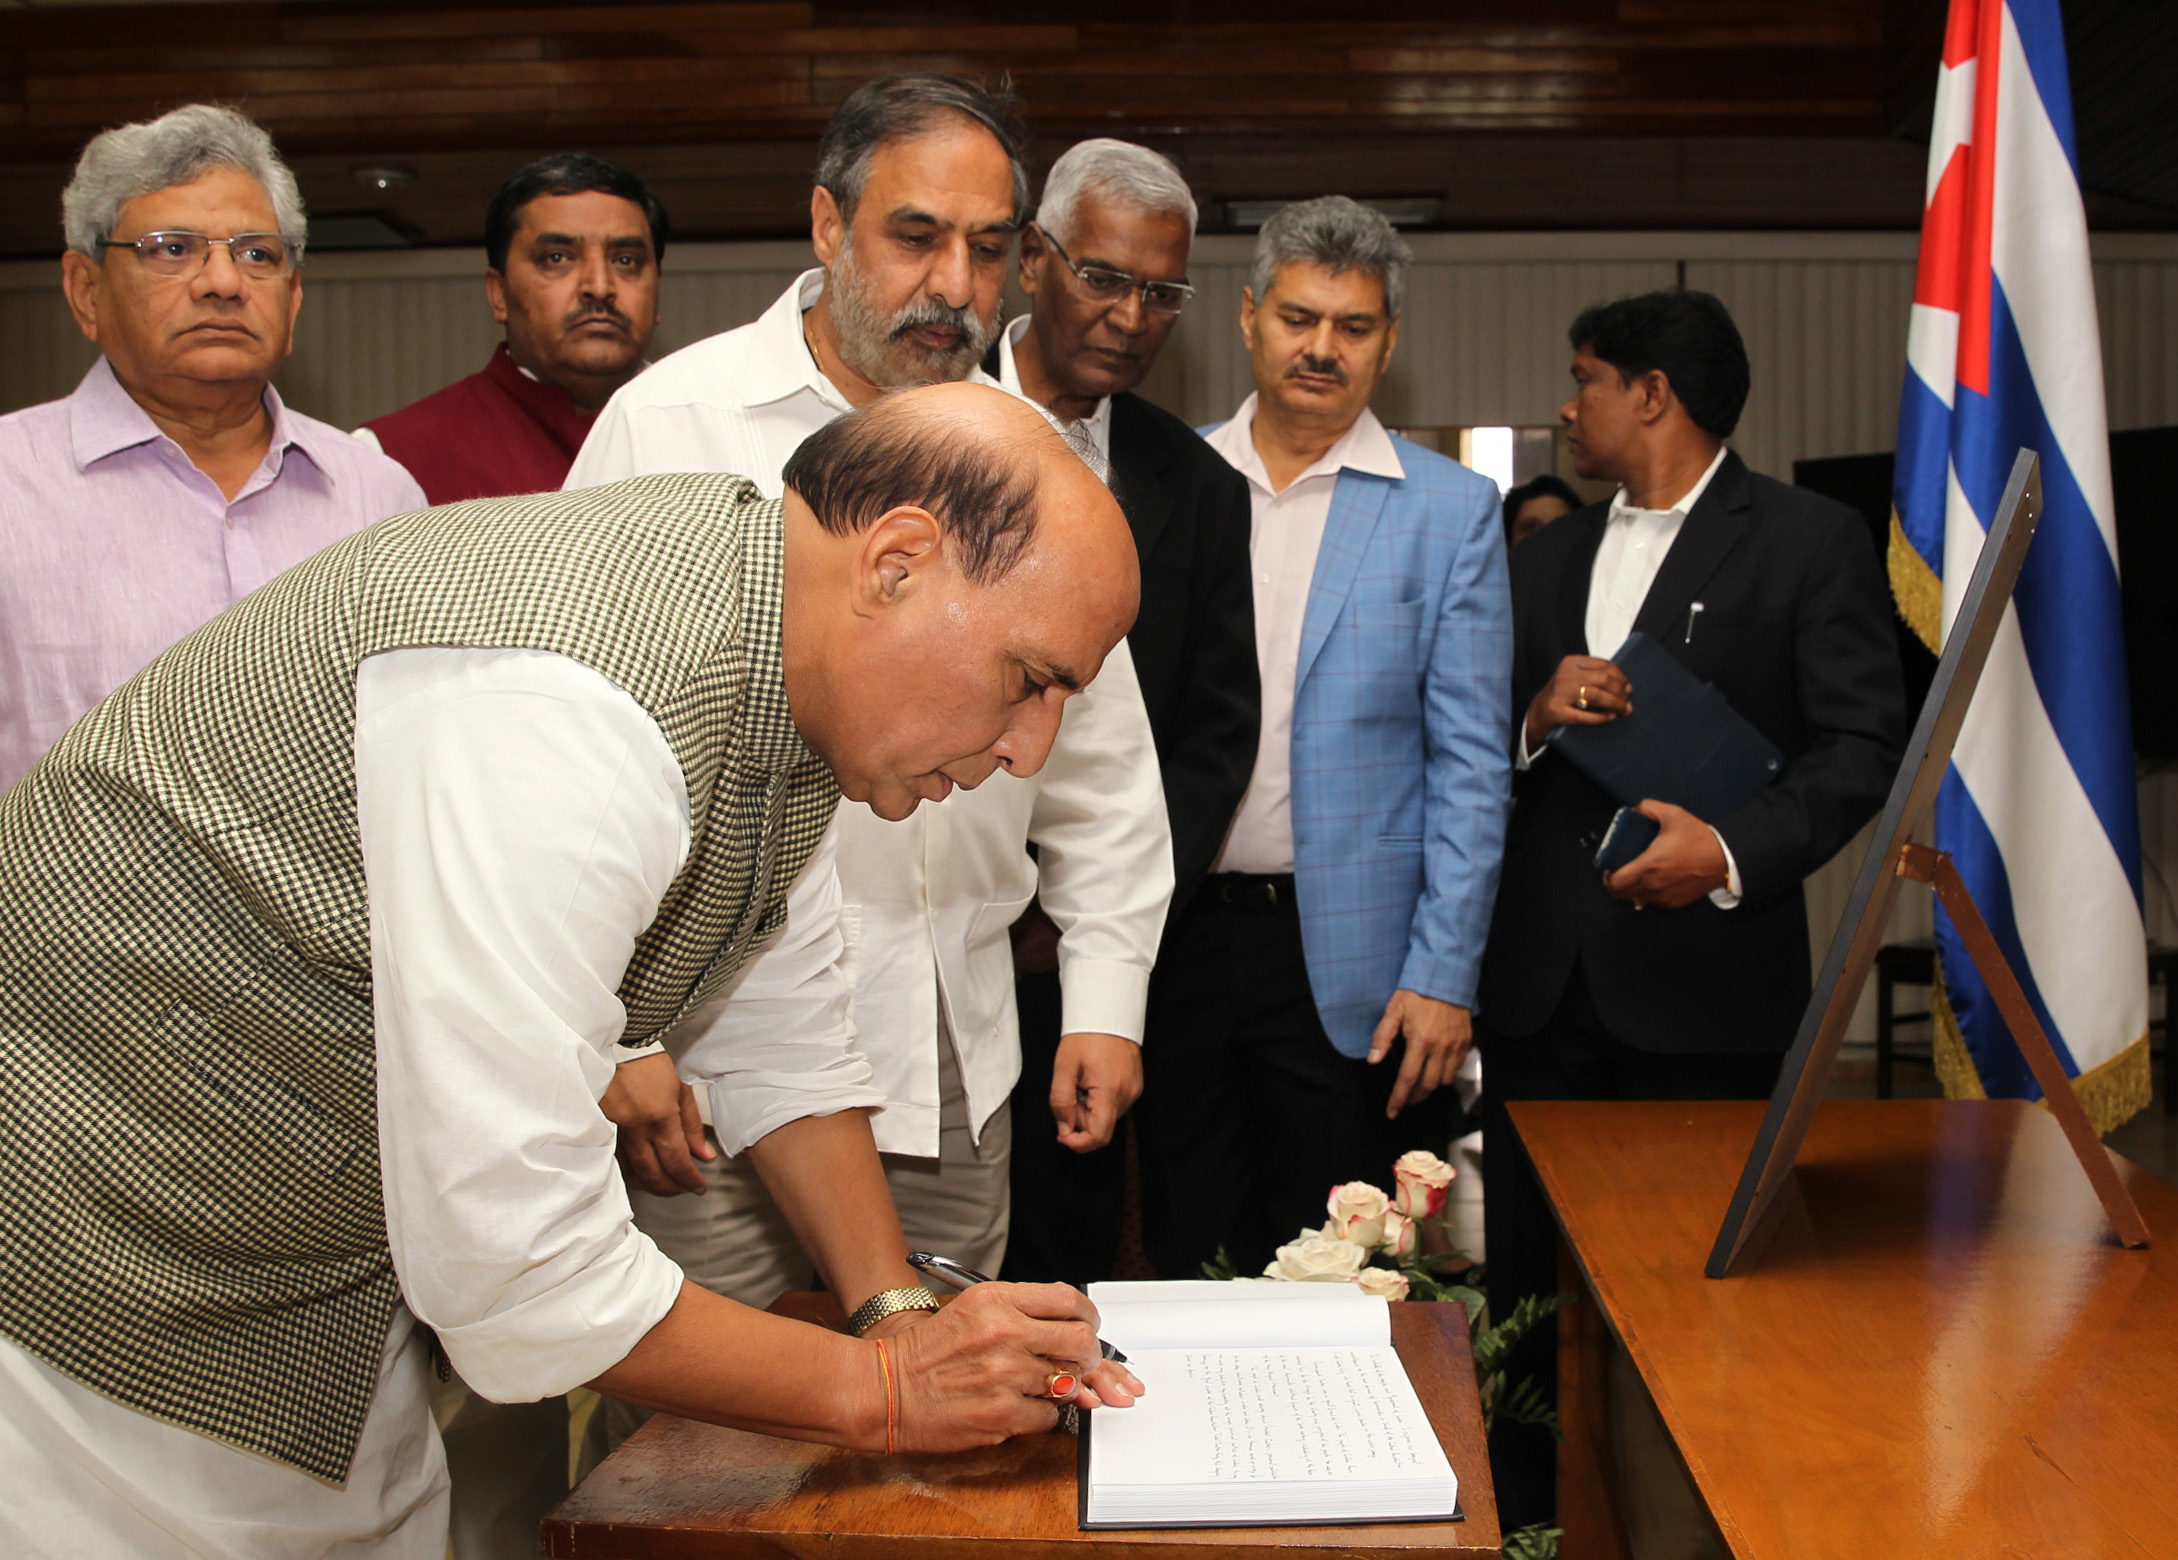 The Union Home Minister, Shri Rajnath Singh signing the Condolence Book at the Cuban Foreign Office, in Havana on November 30, 2016.